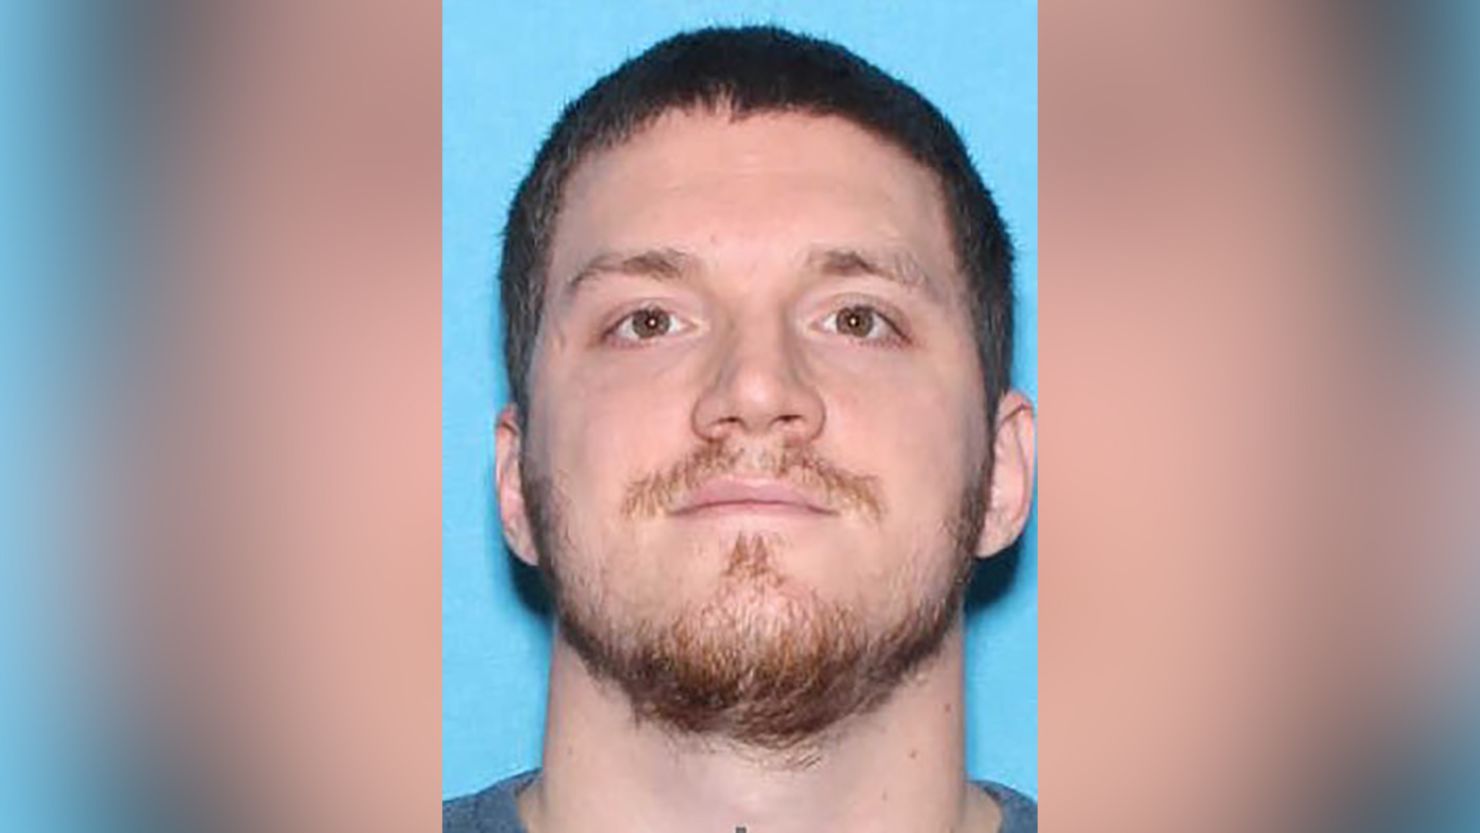 Grady Wayne Wilkes is the suspect in a fatal police shooting in Alabama..